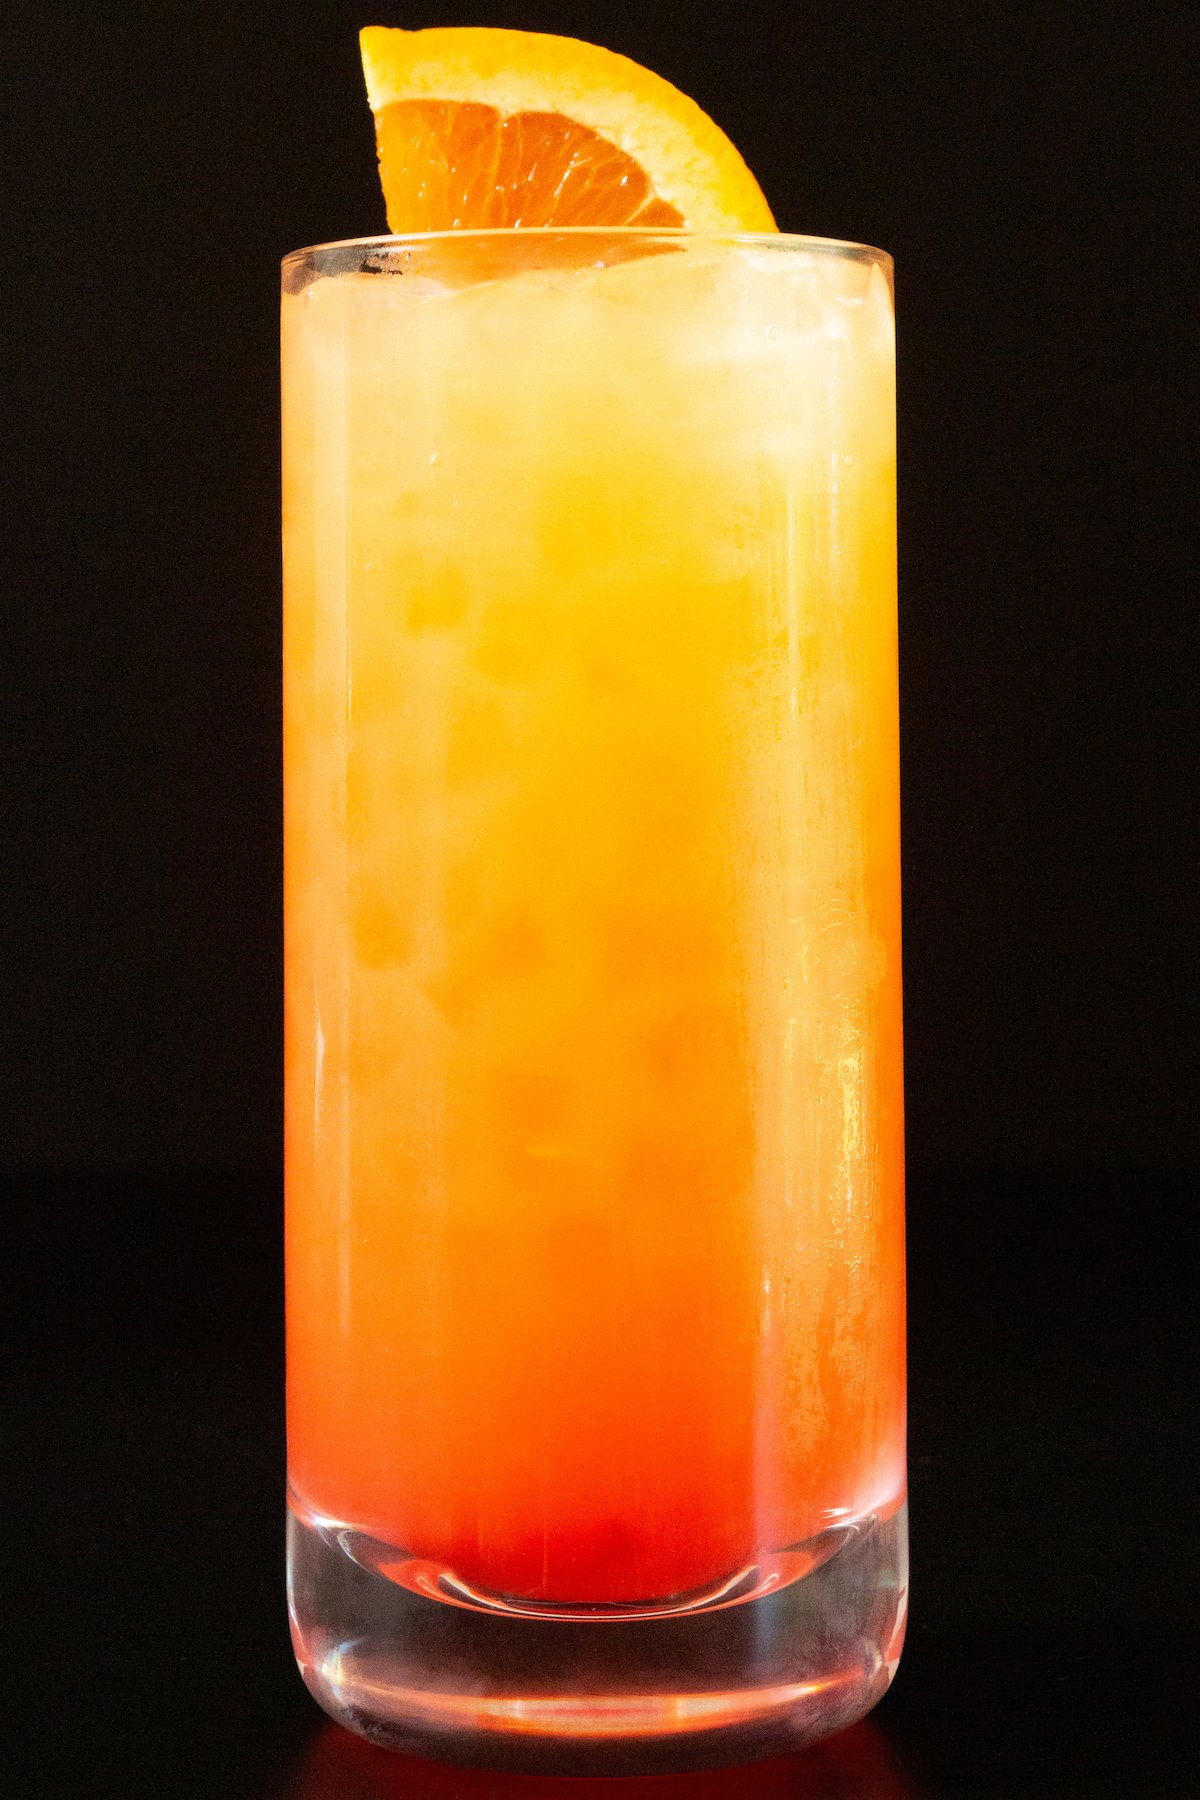 A high ball glass is filled with orange juice and grenadine that makes it look like a sunrise. A sliced orange is used as garnish.